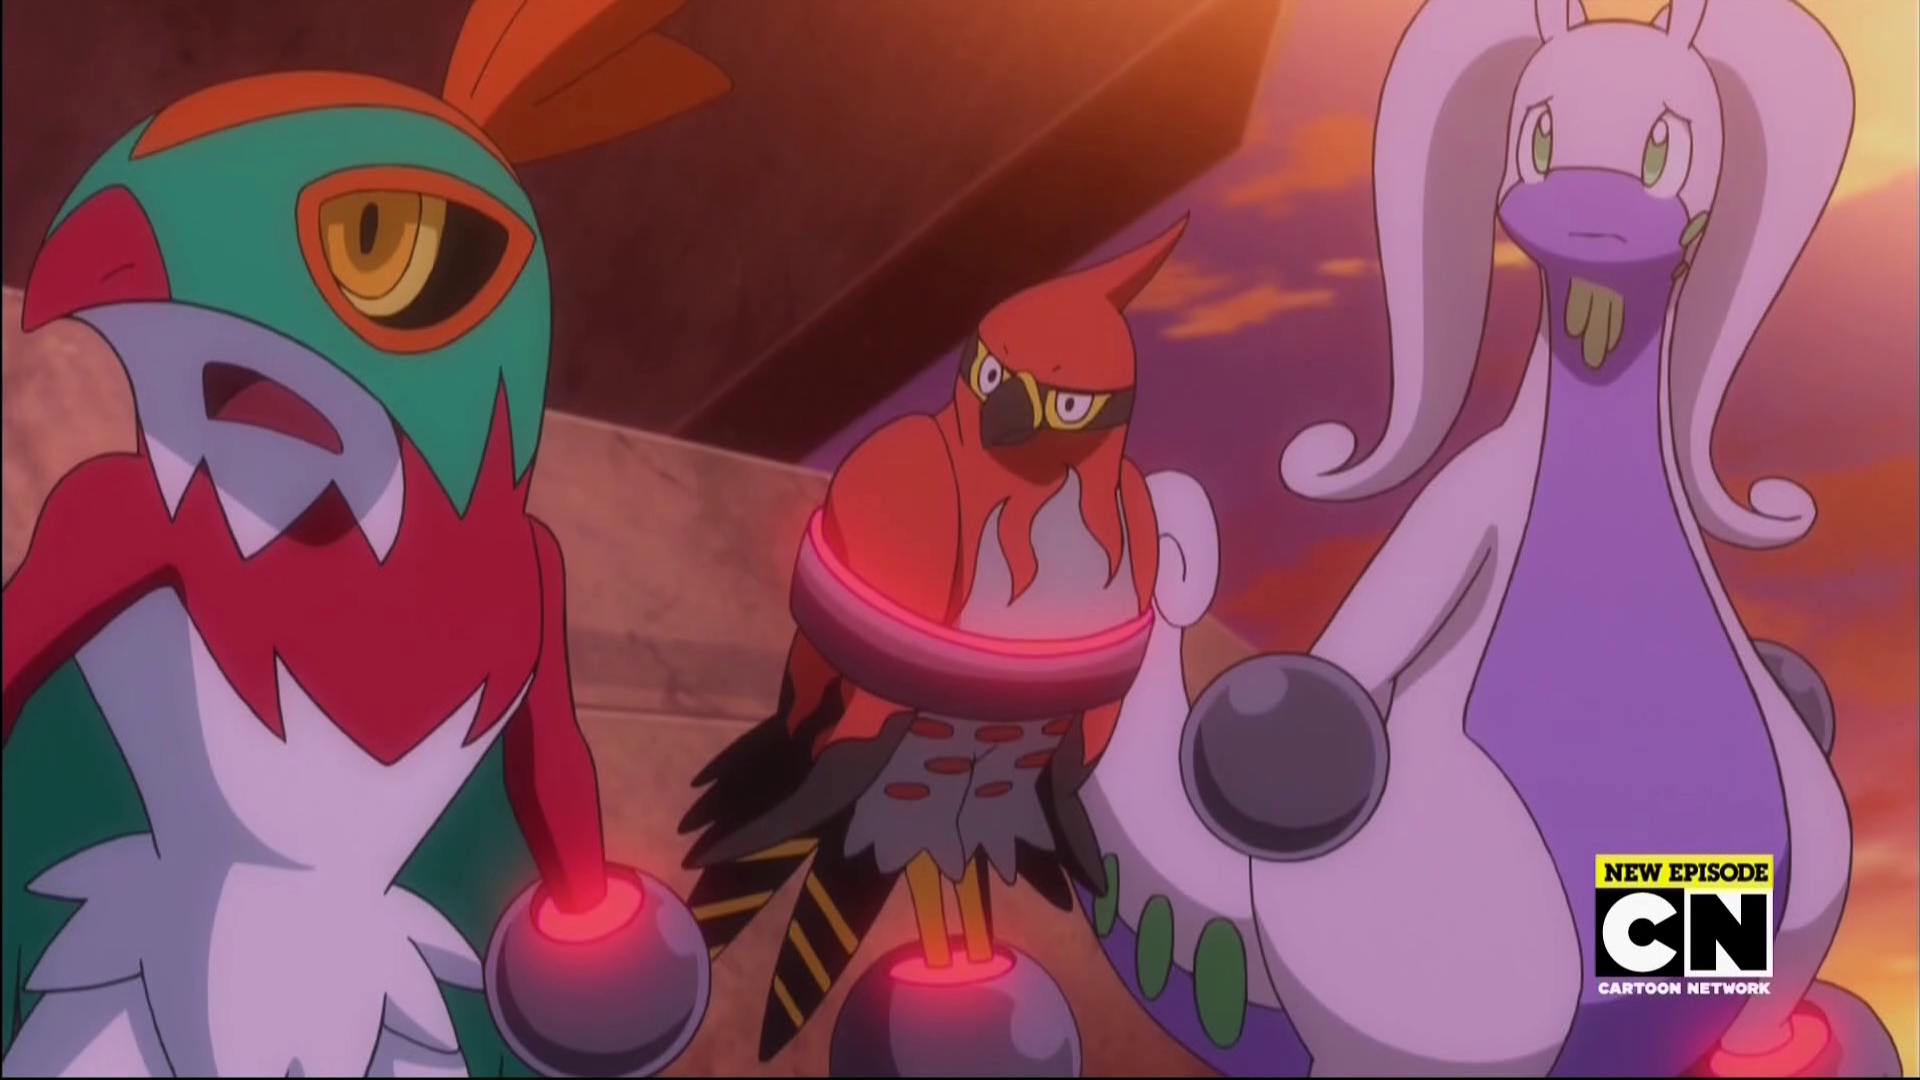 Hawlucha's wings are also not extended out. 